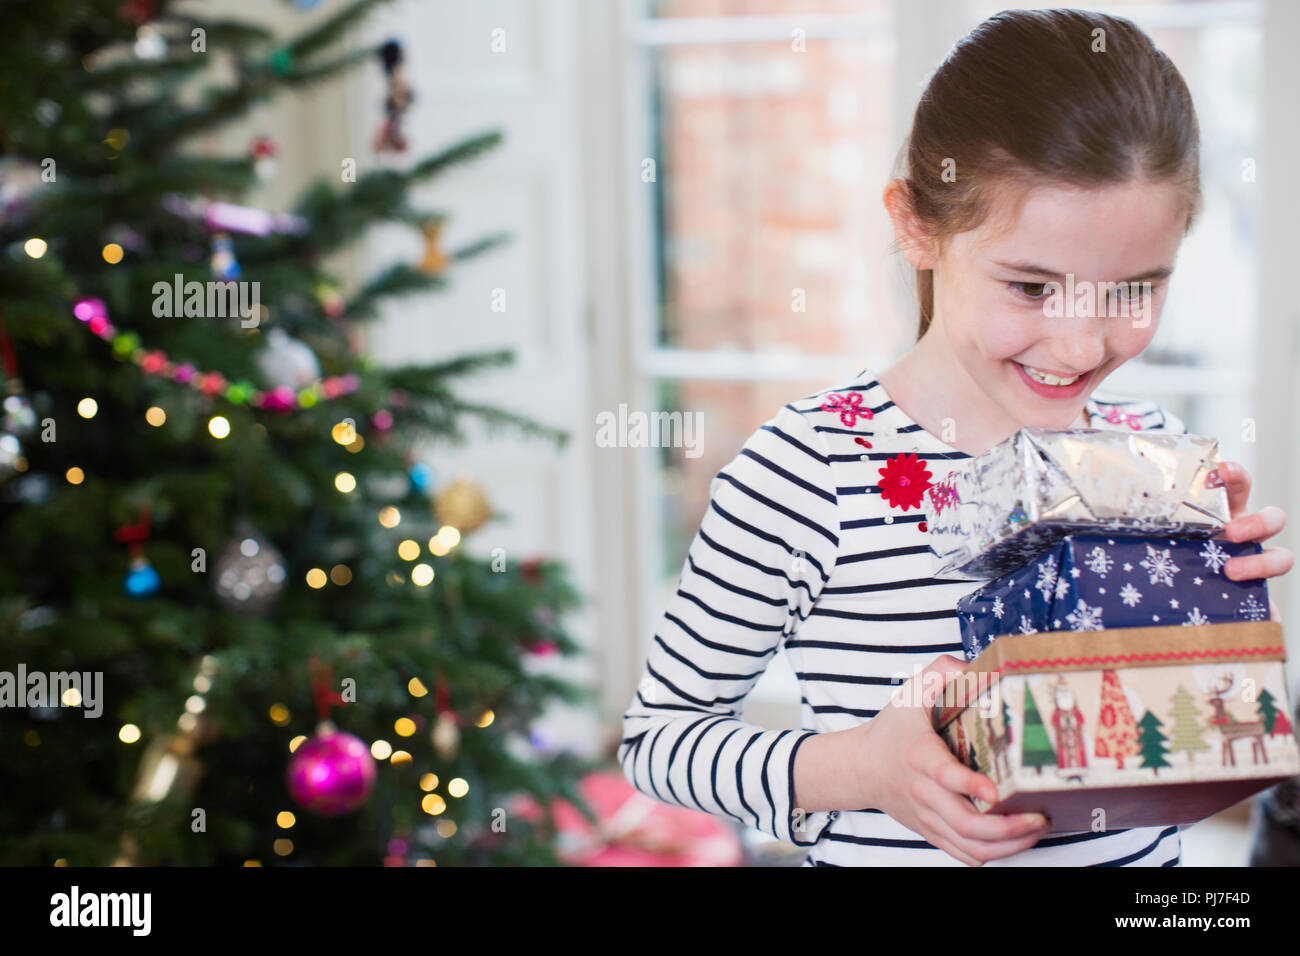 Smiling, eager girl gathering Christmas gifts in living room Stock Photo